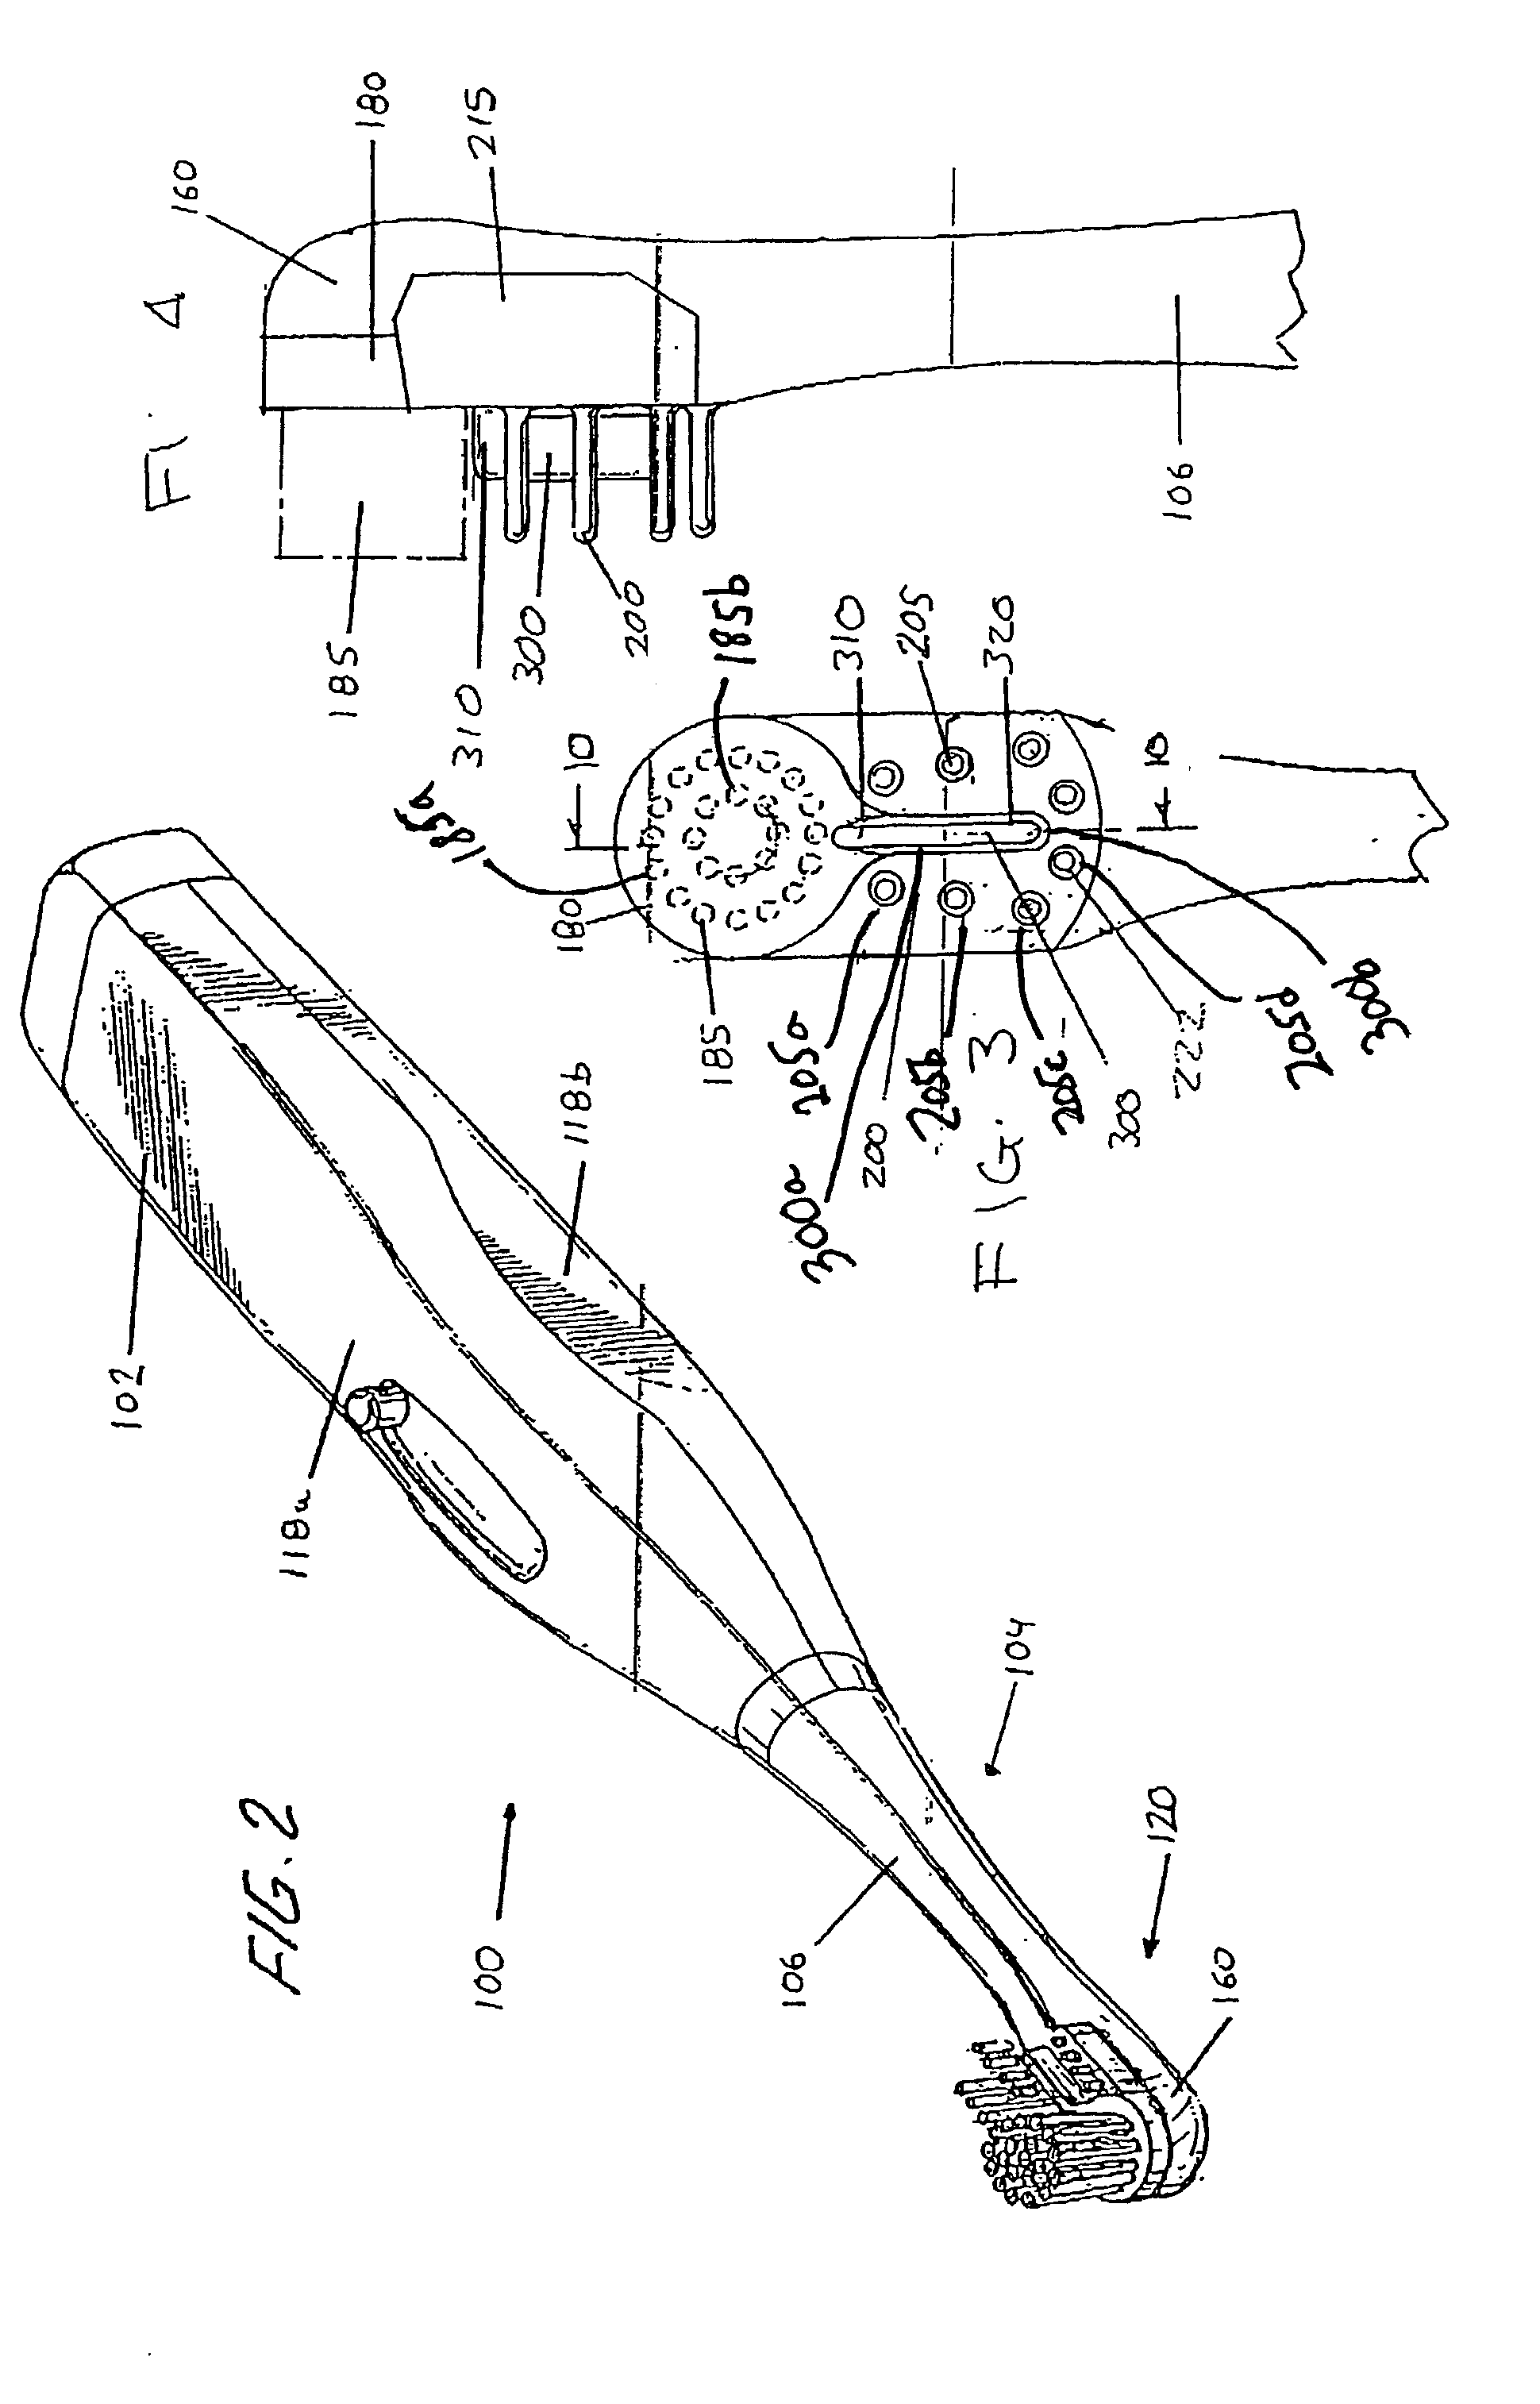 Toothbrush with linear and rotary fields